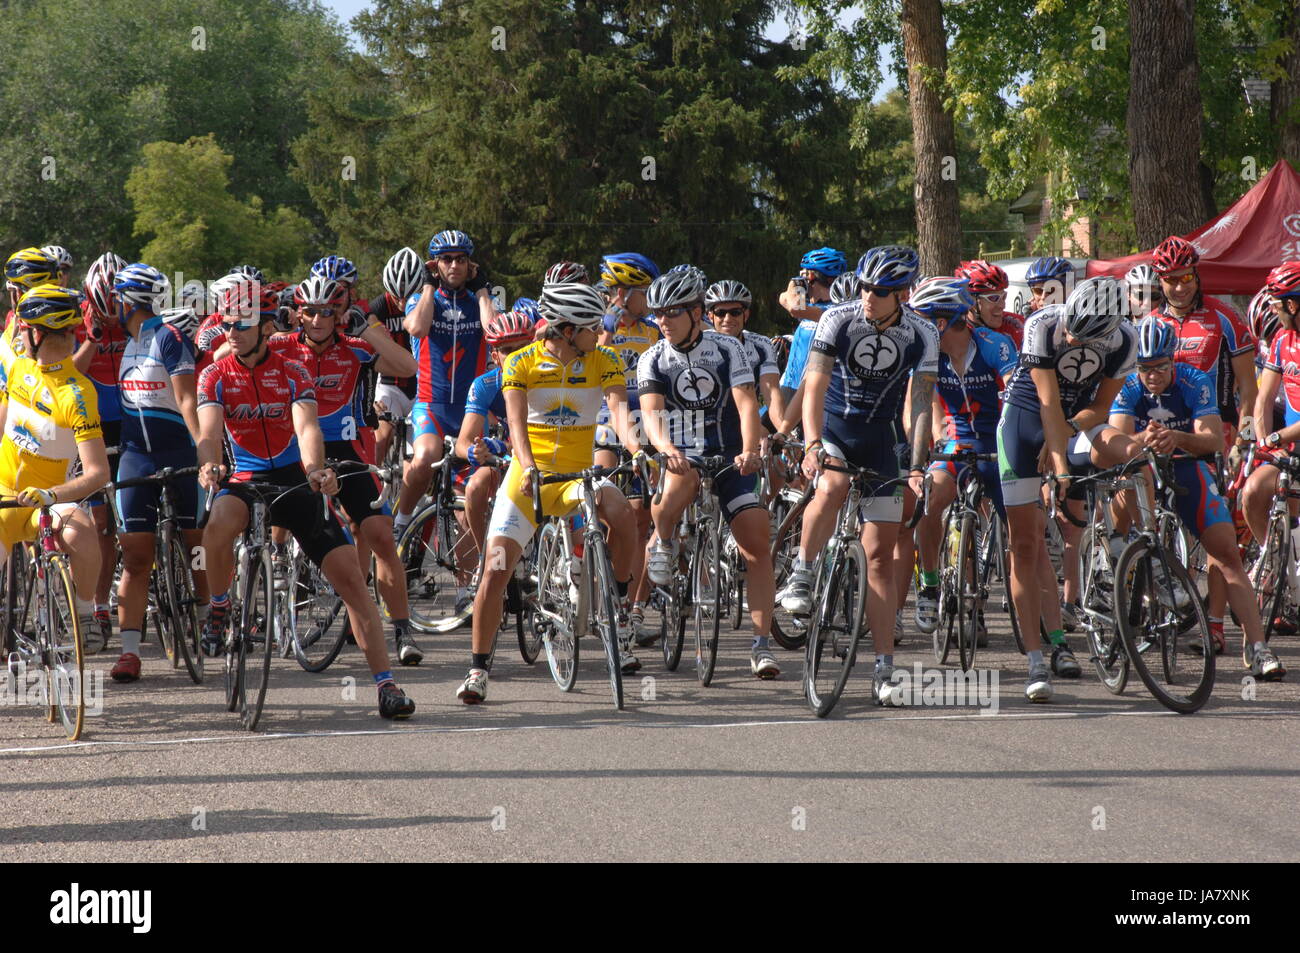 Spring City, Utah, USA - 2 August 2006: Group of cyclists waiting for the the Sanpete Classic Road Race in Sanpete County Utah to begin. Men standing  Stock Photo